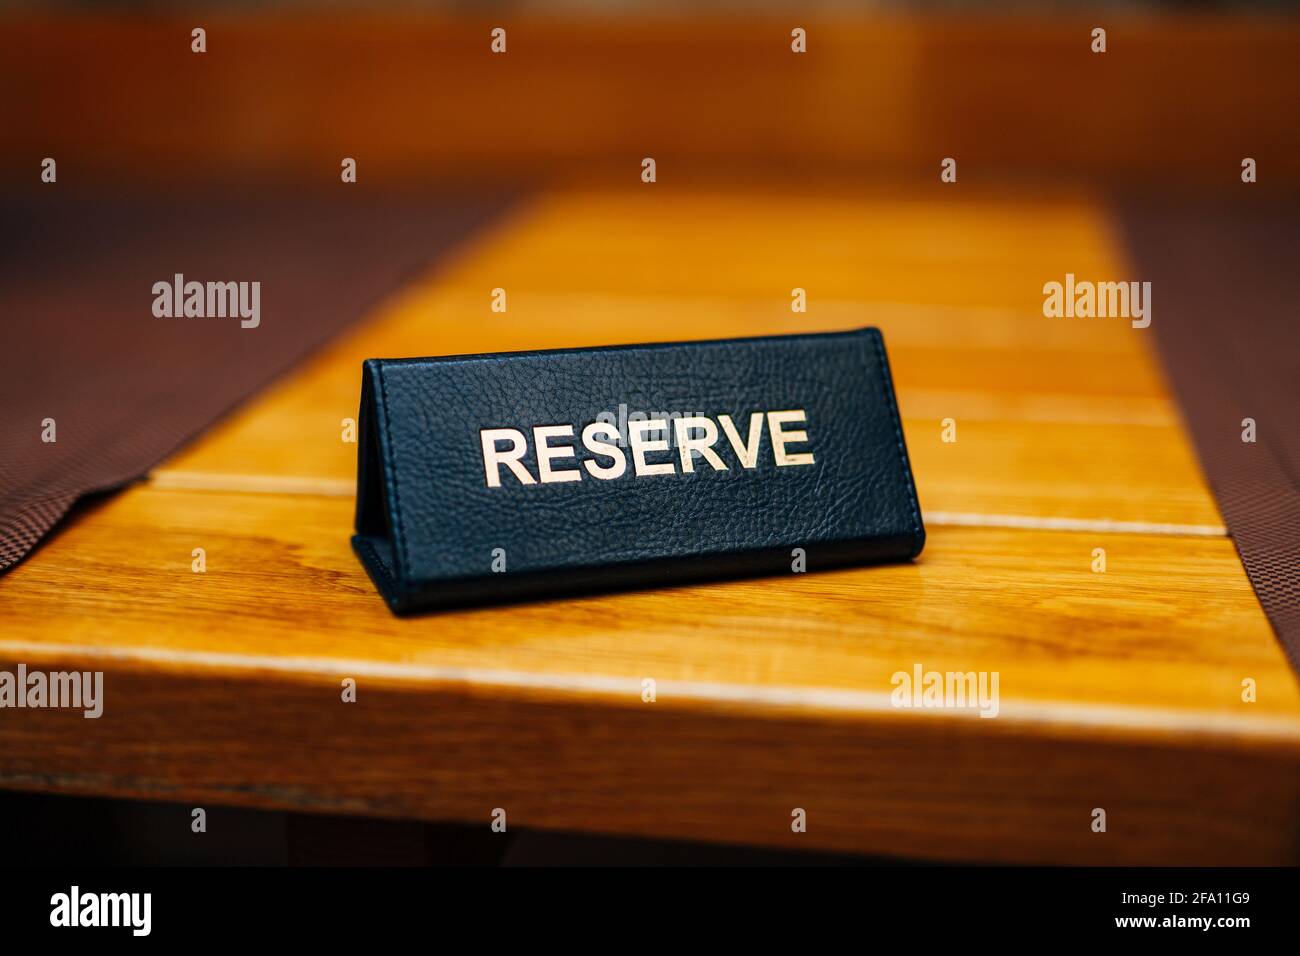 Sign reserve on a wooden table in a restaurant. Title: Reserve Stock Photo